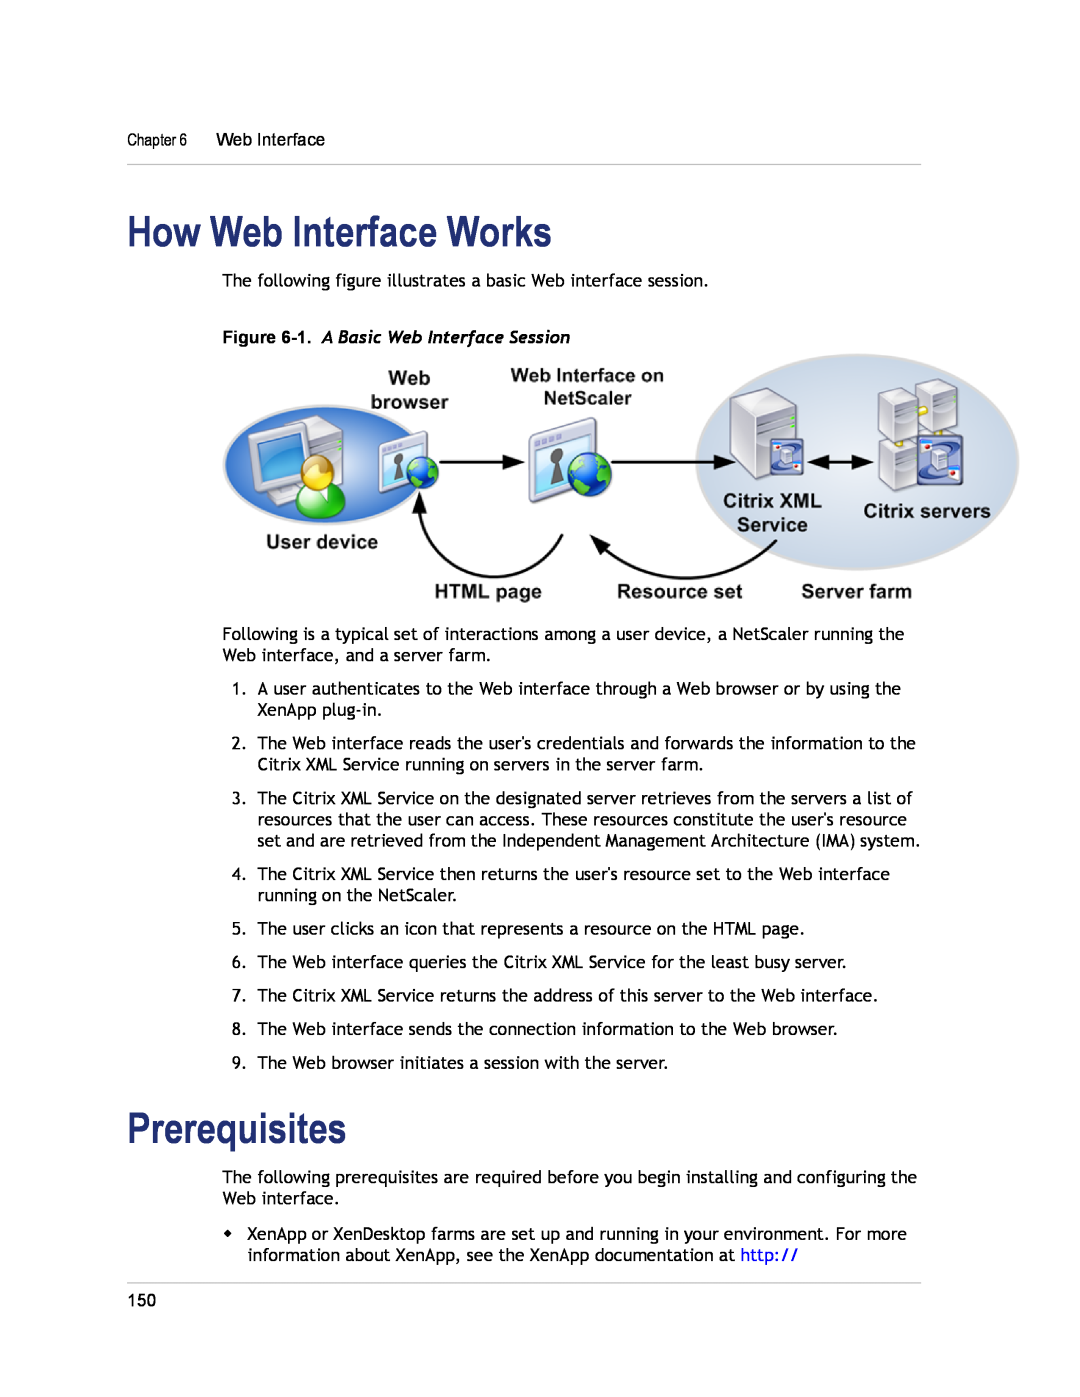 Citrix Systems CITRIX NETSCALER 9.3 manual How Web Interface Works, Prerequisites, 1. A Basic Web Interface Session 